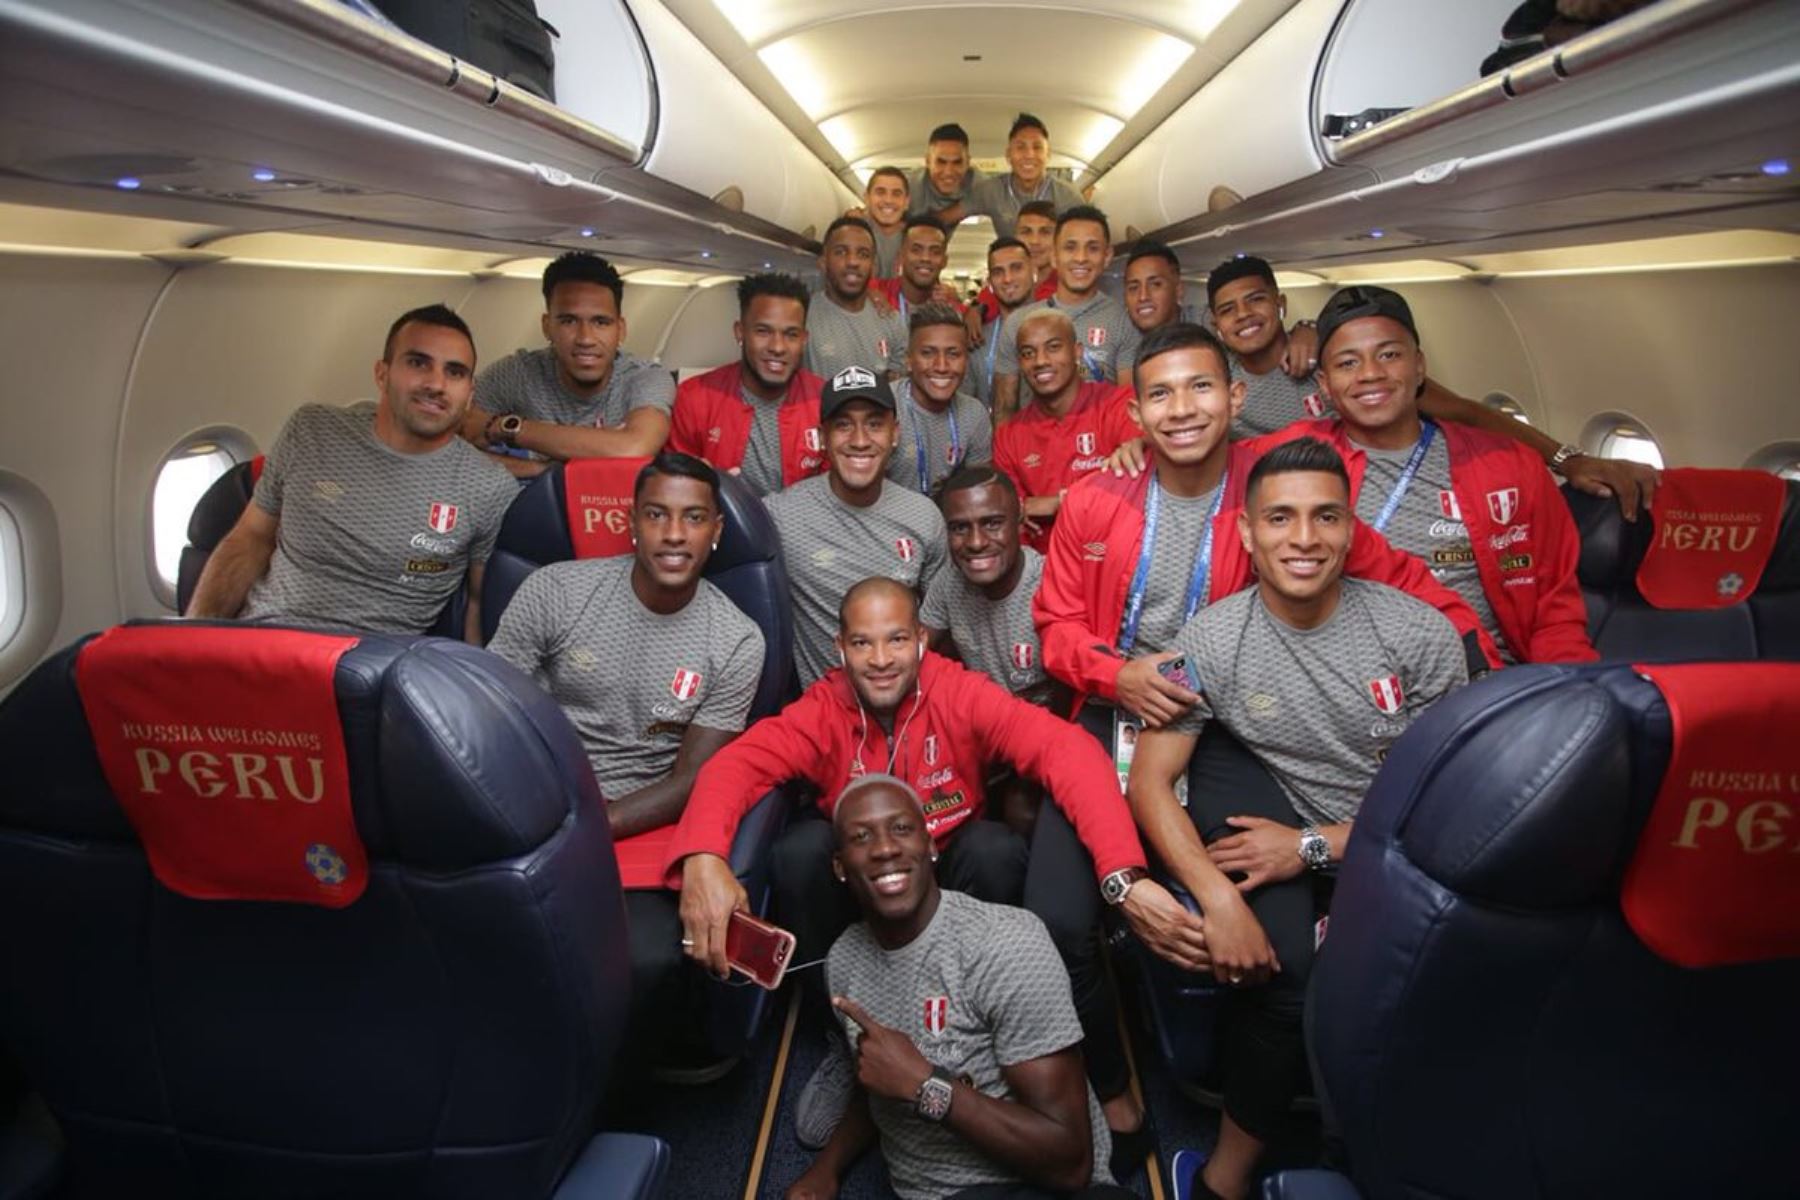 Peru soccer team arrive home after World Cup participation N